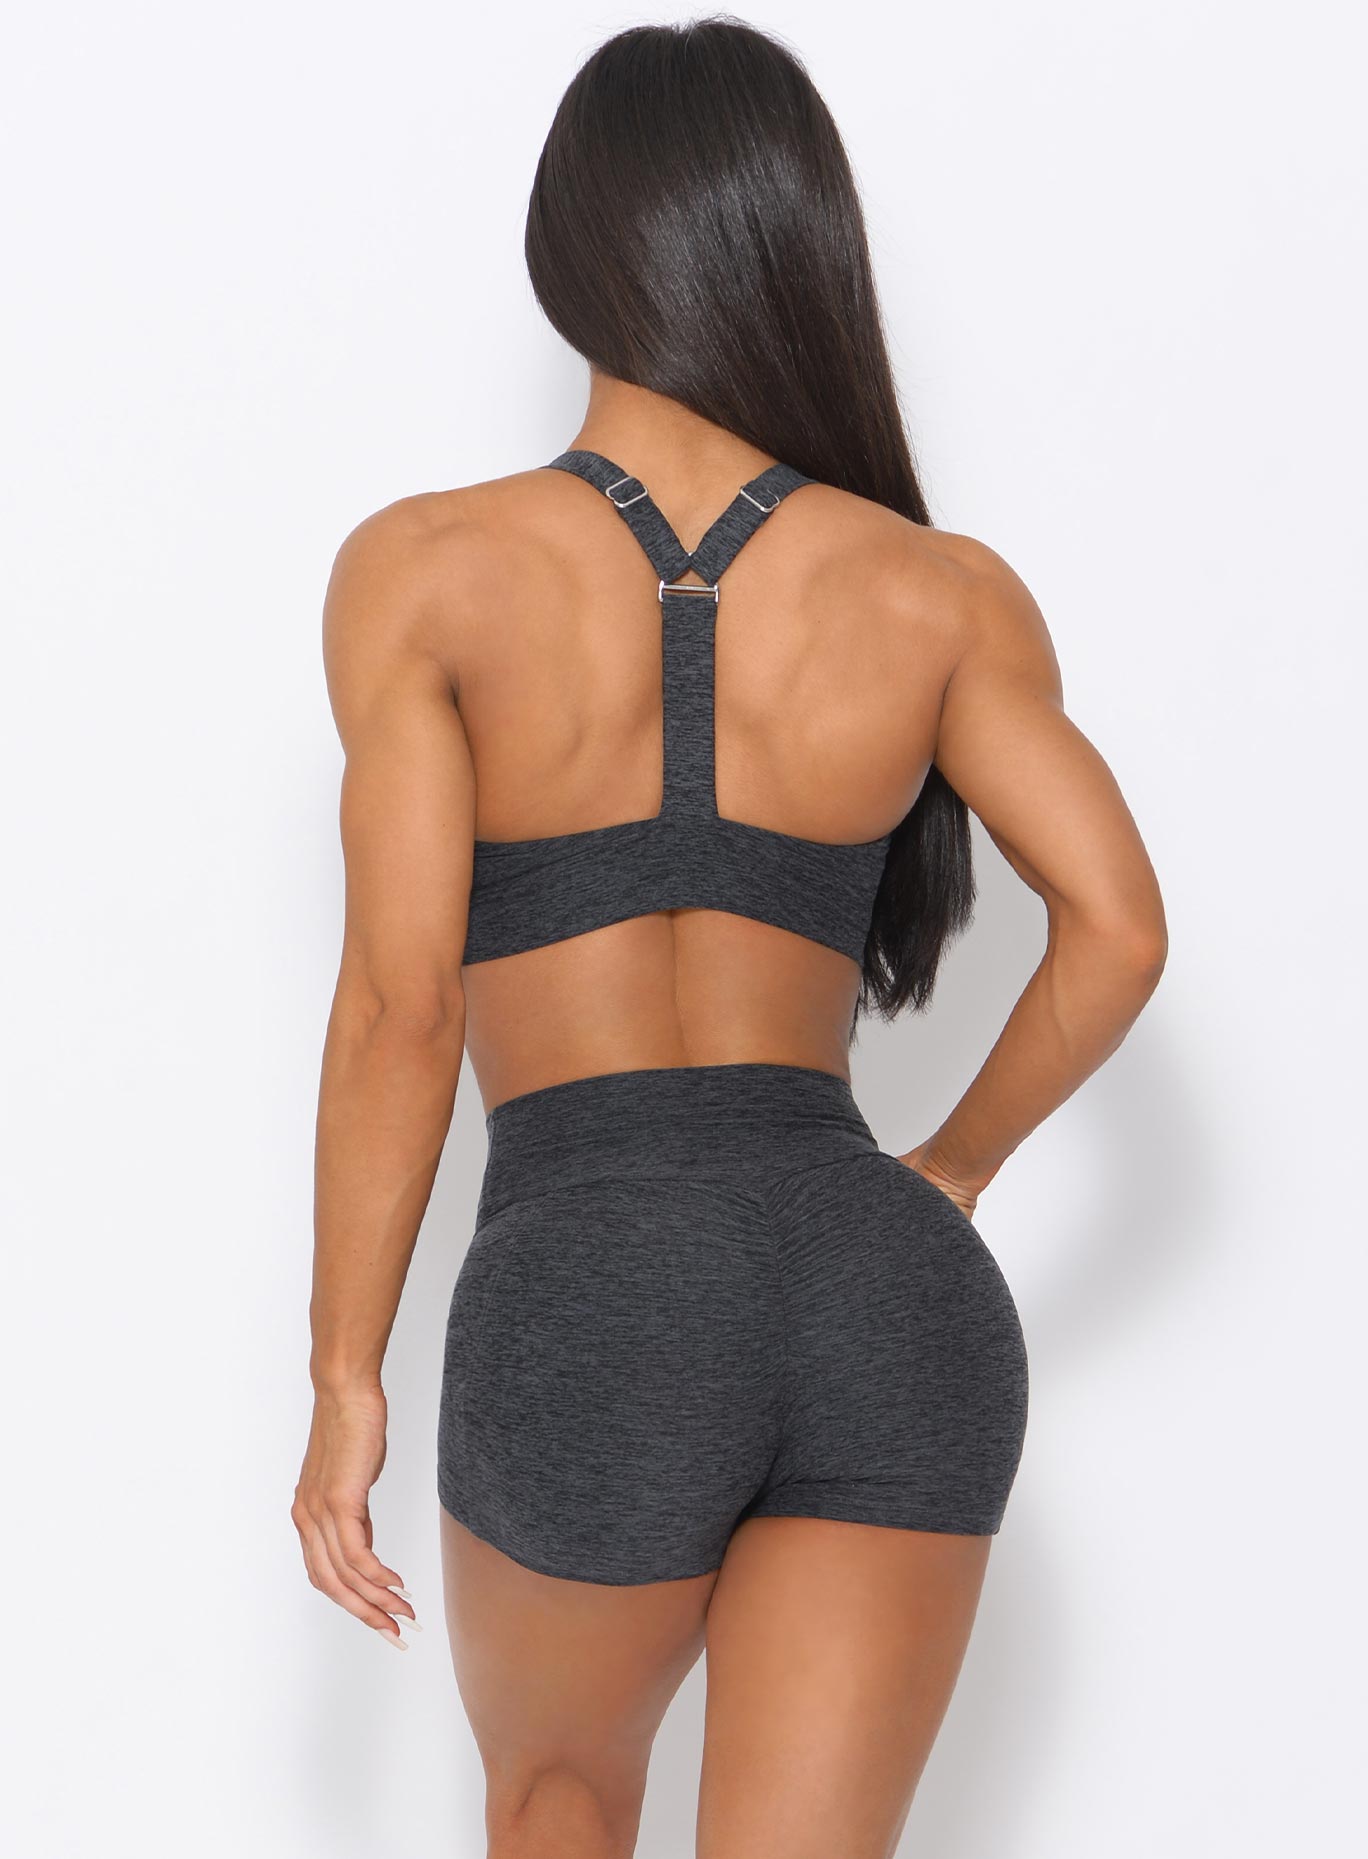 back view of the model wearing our curves high waist shorts in charcoal color and a matching bra